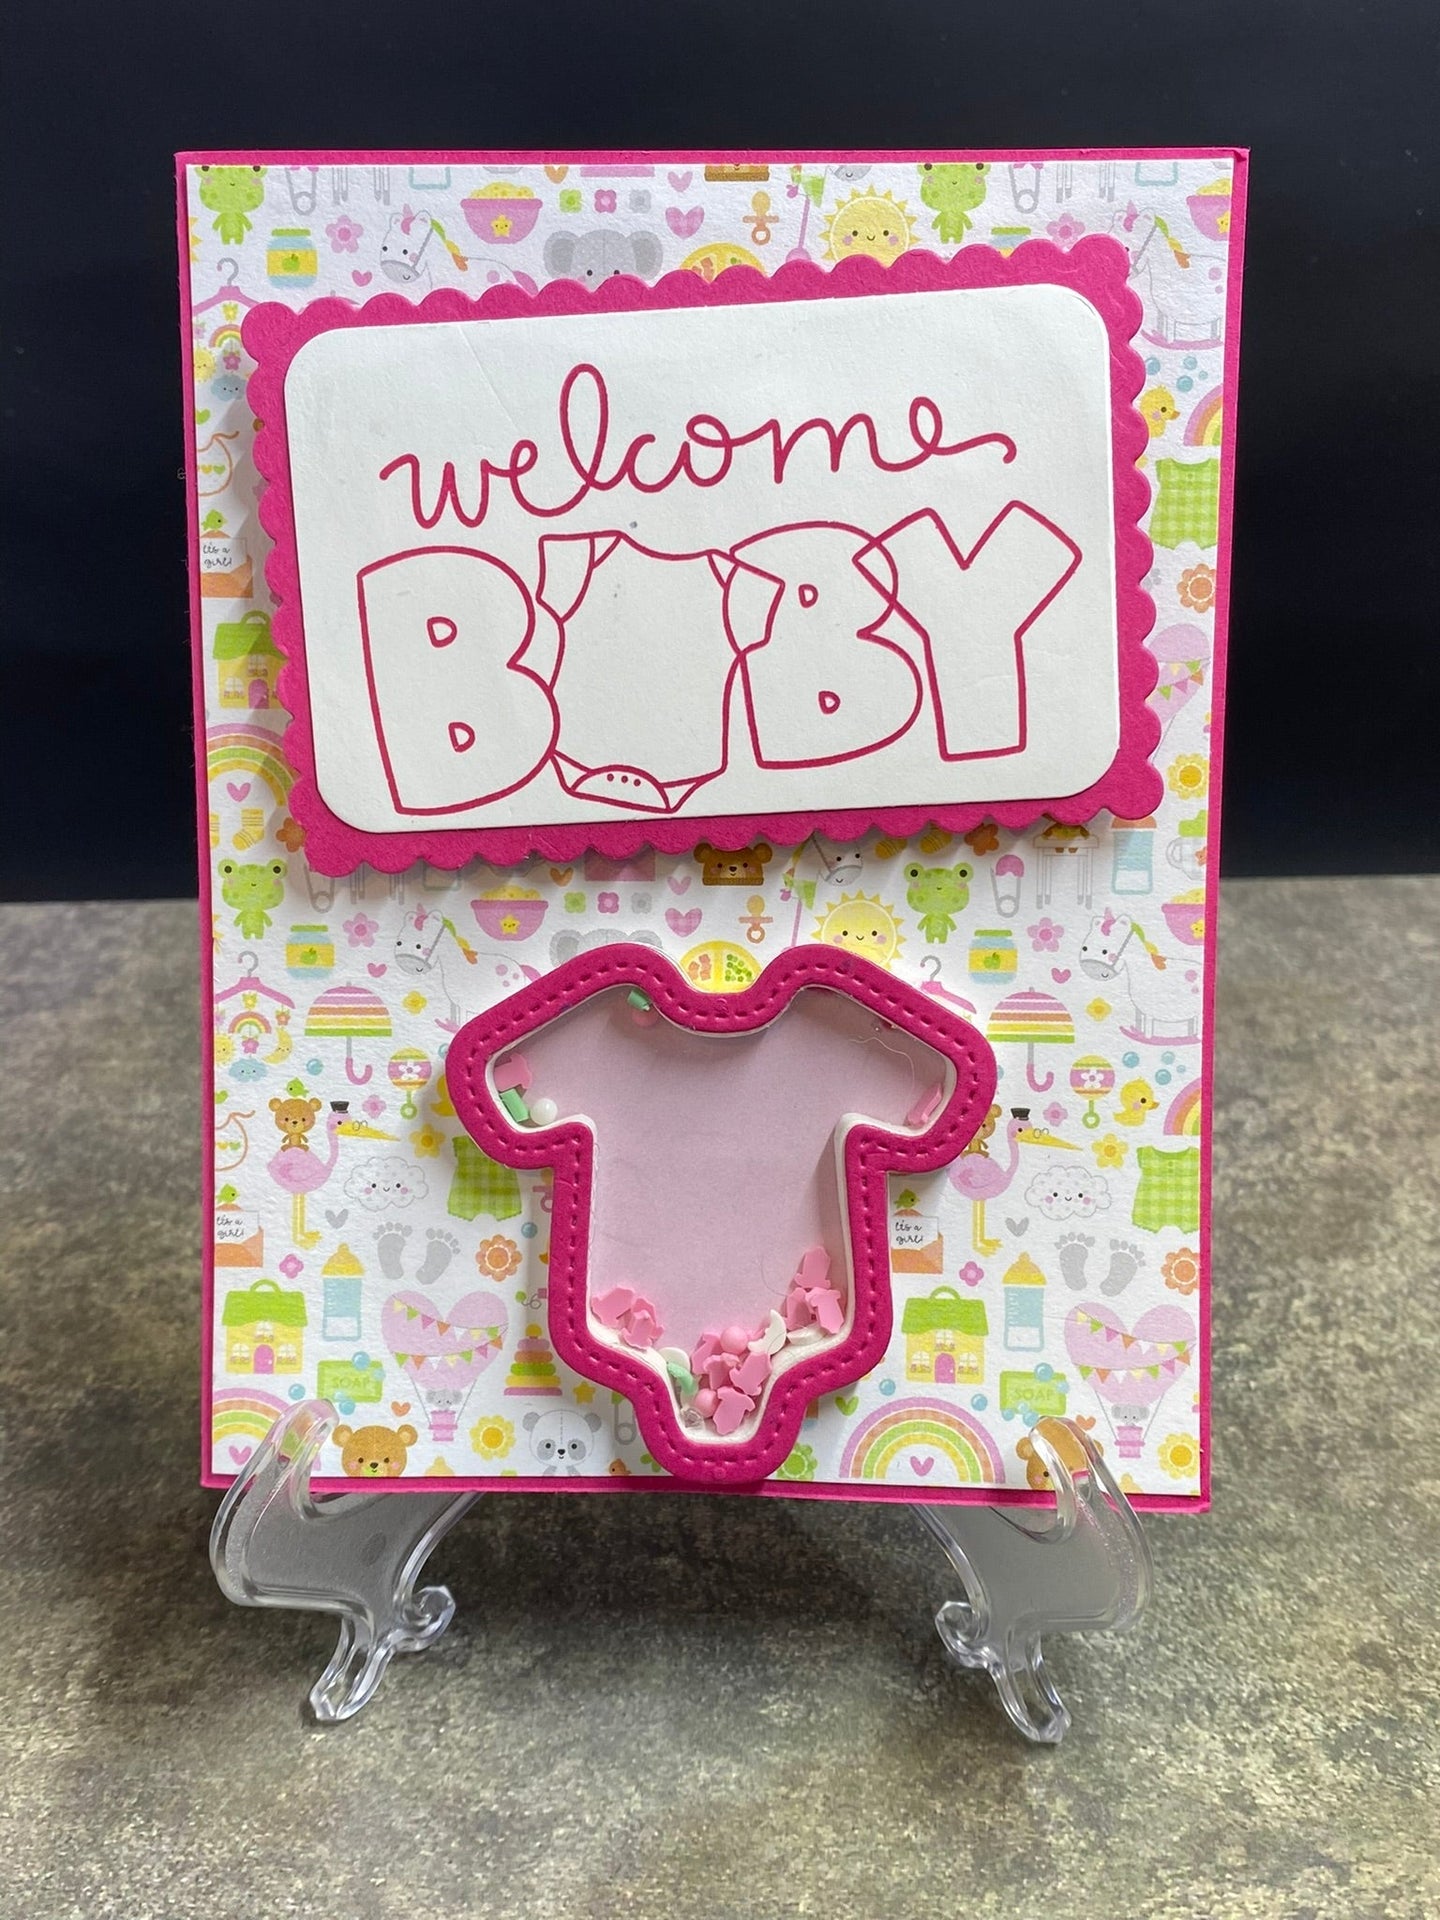 Welcome Baby in pinks